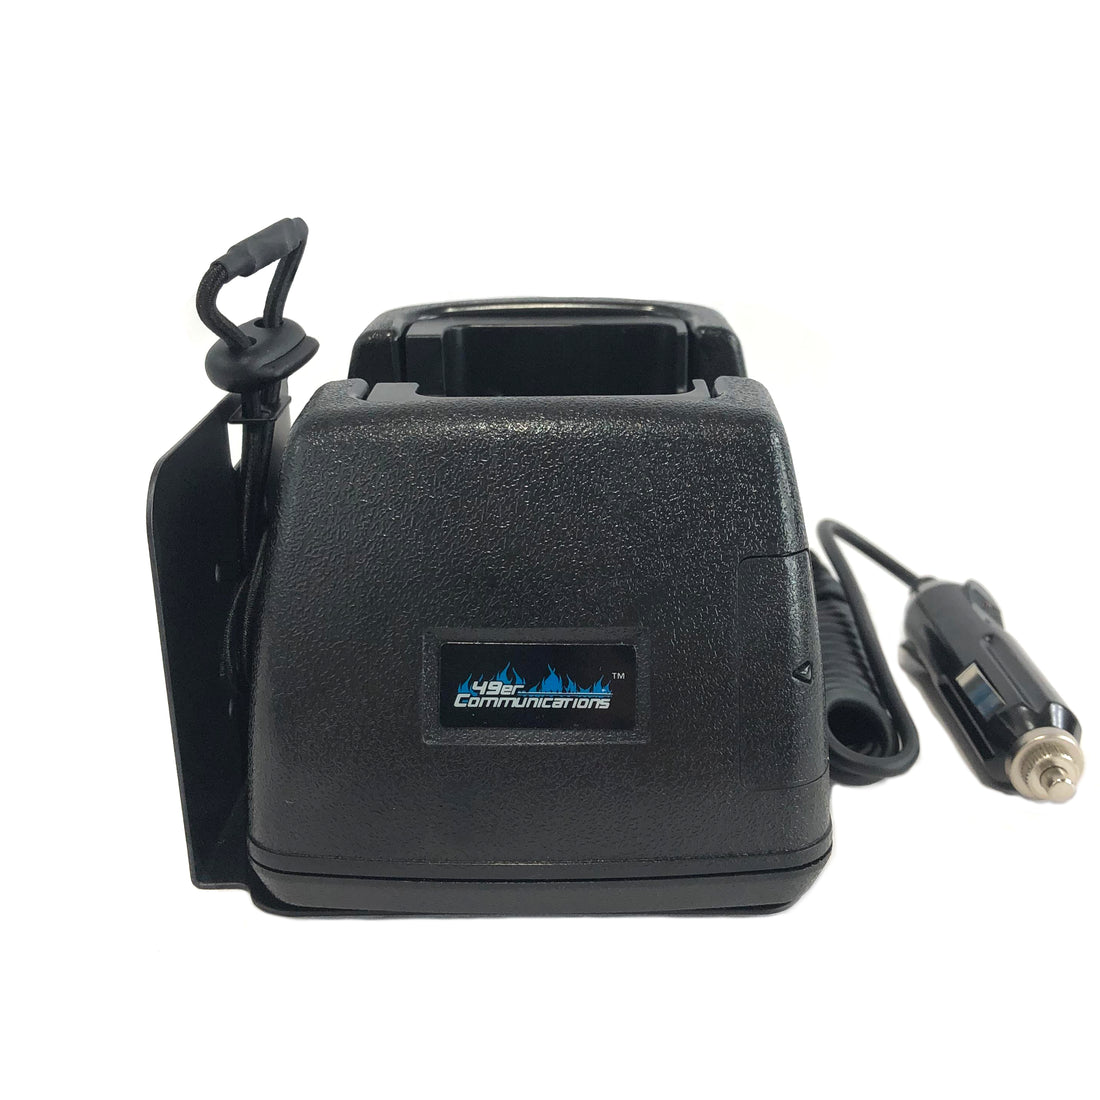 Vehicle Charger, CHIC3VC9R1BE - Rapid Rate, Includes mounting bracket and cigarette lighter plug for iCOM C-A16, IC-F1100/2100 (D/DT/DS), IC-F1000/2000 (D/T/S), IC-V10MR Radio Batteries